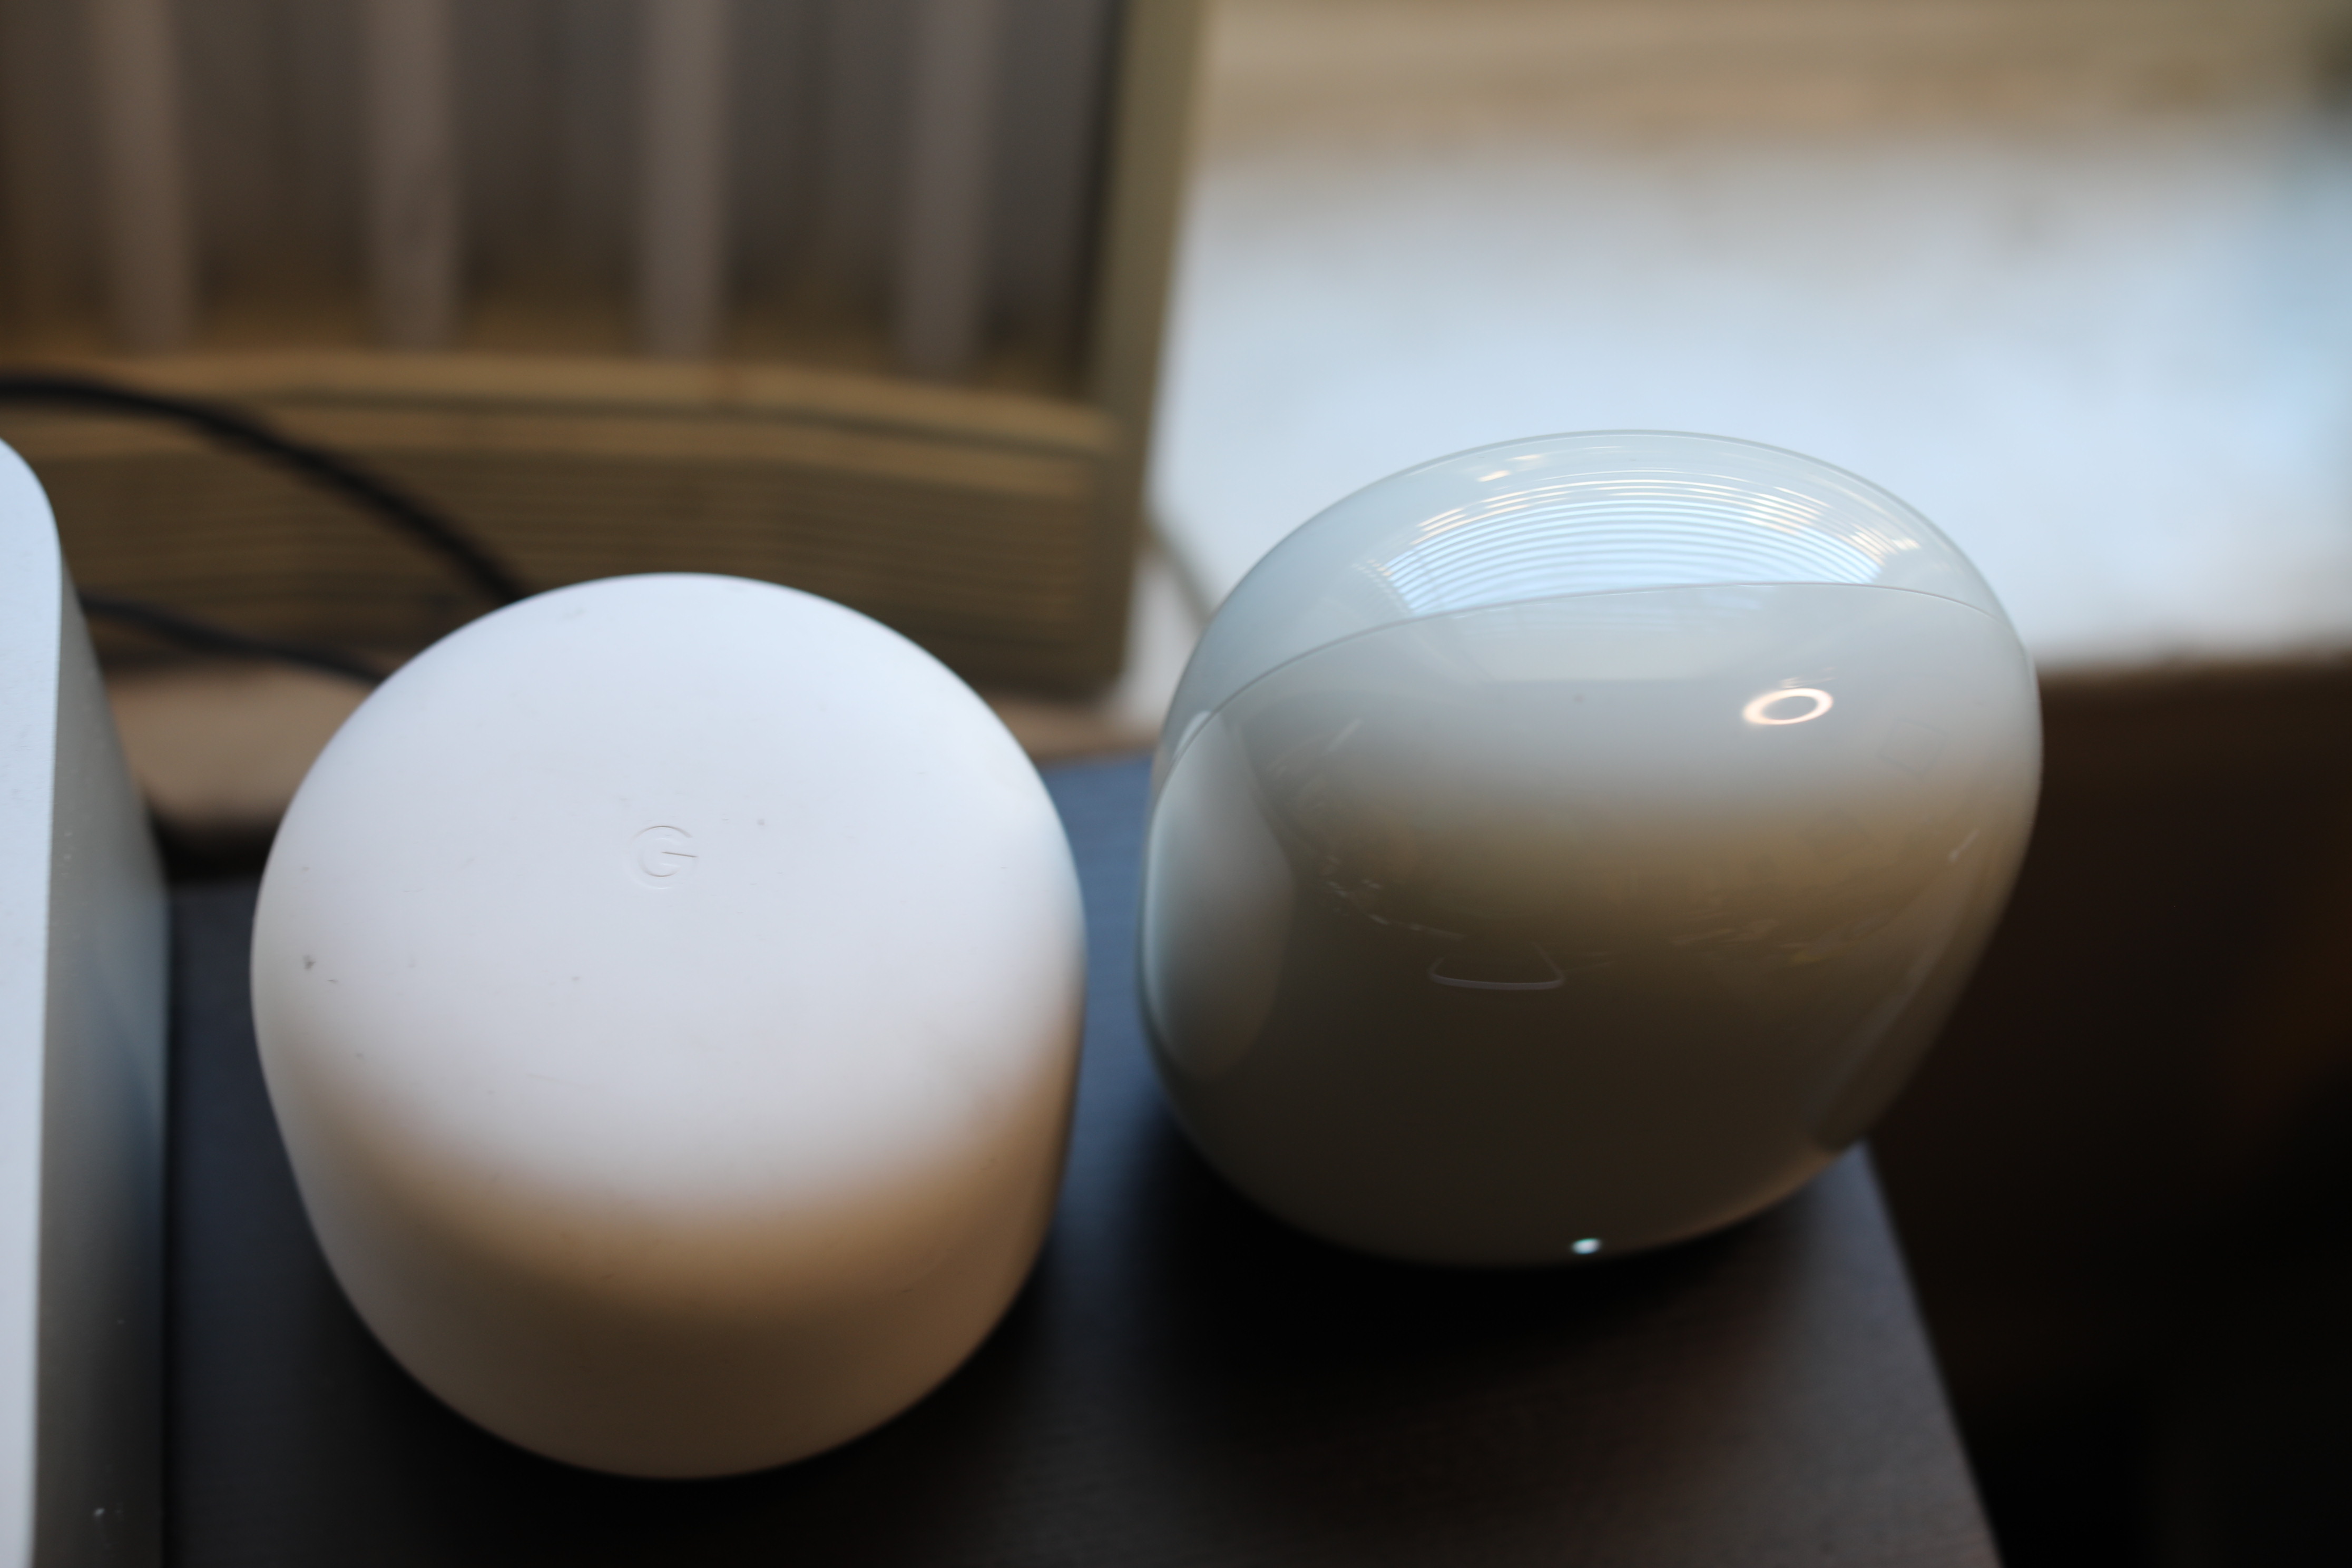 Google’s Nest Wifi Pro is a dead simple way to bring Wi-Fi 6E home